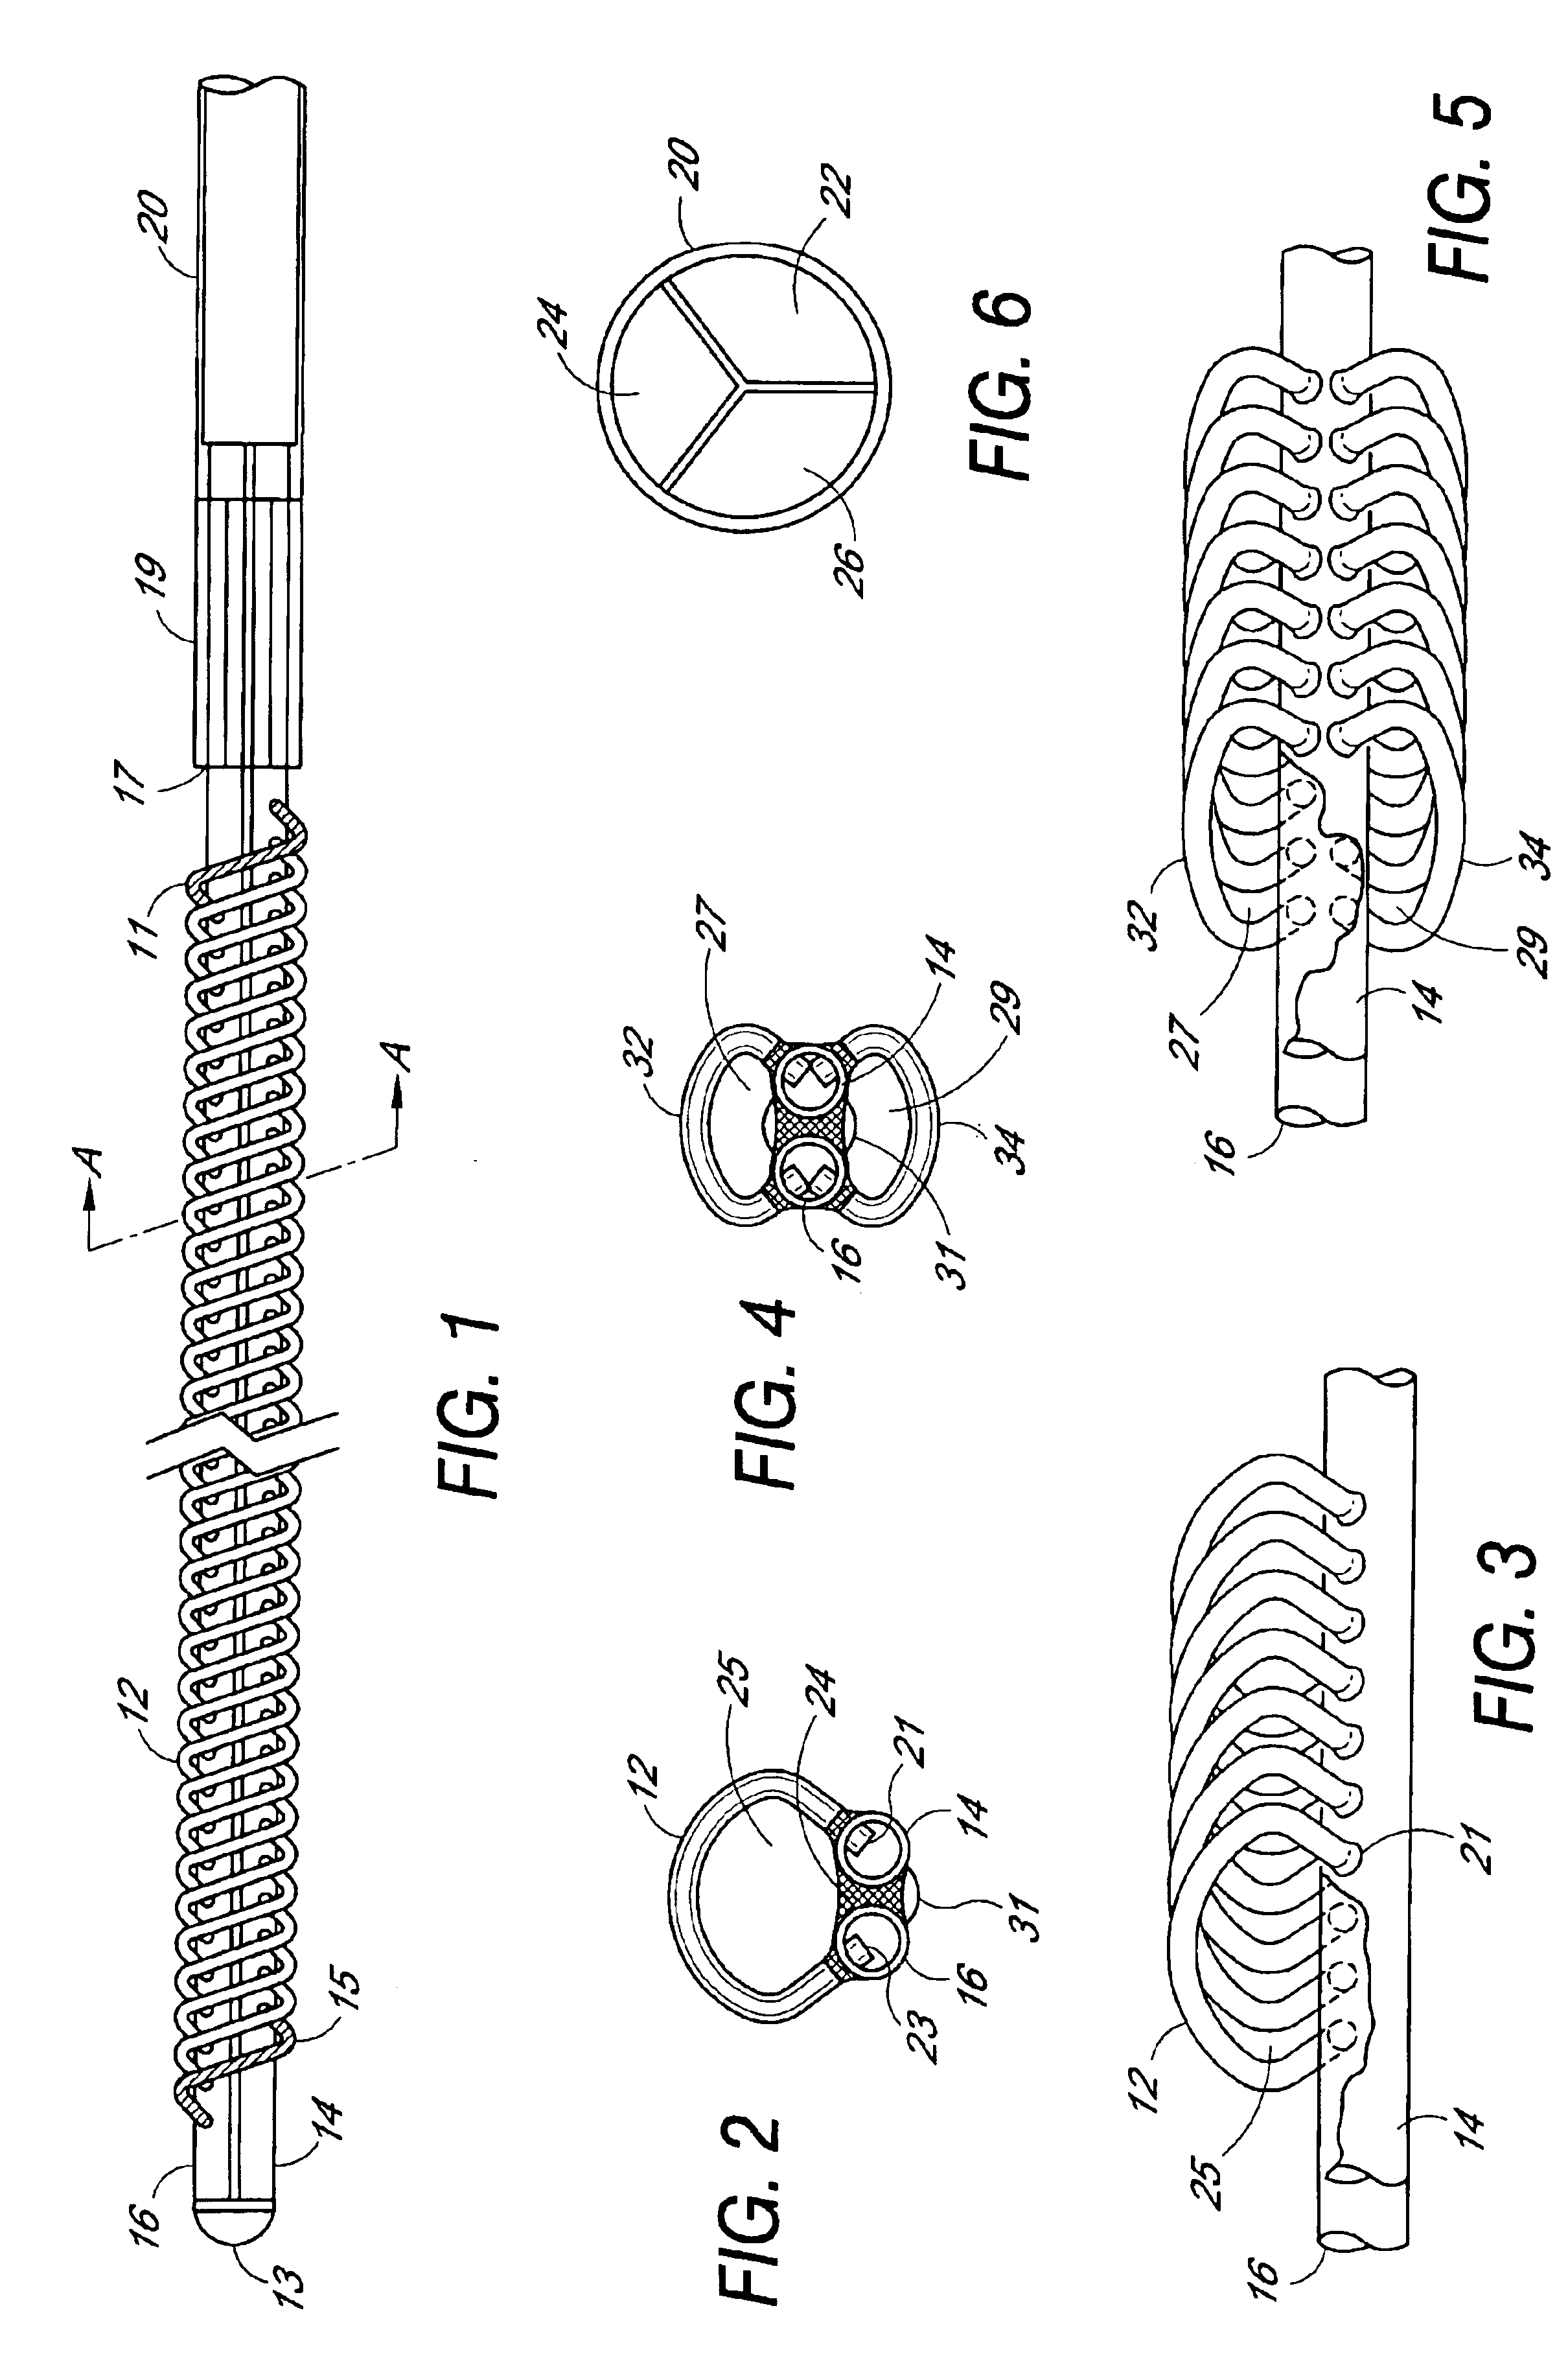 Plasmapheresis filter device and catheter assembly